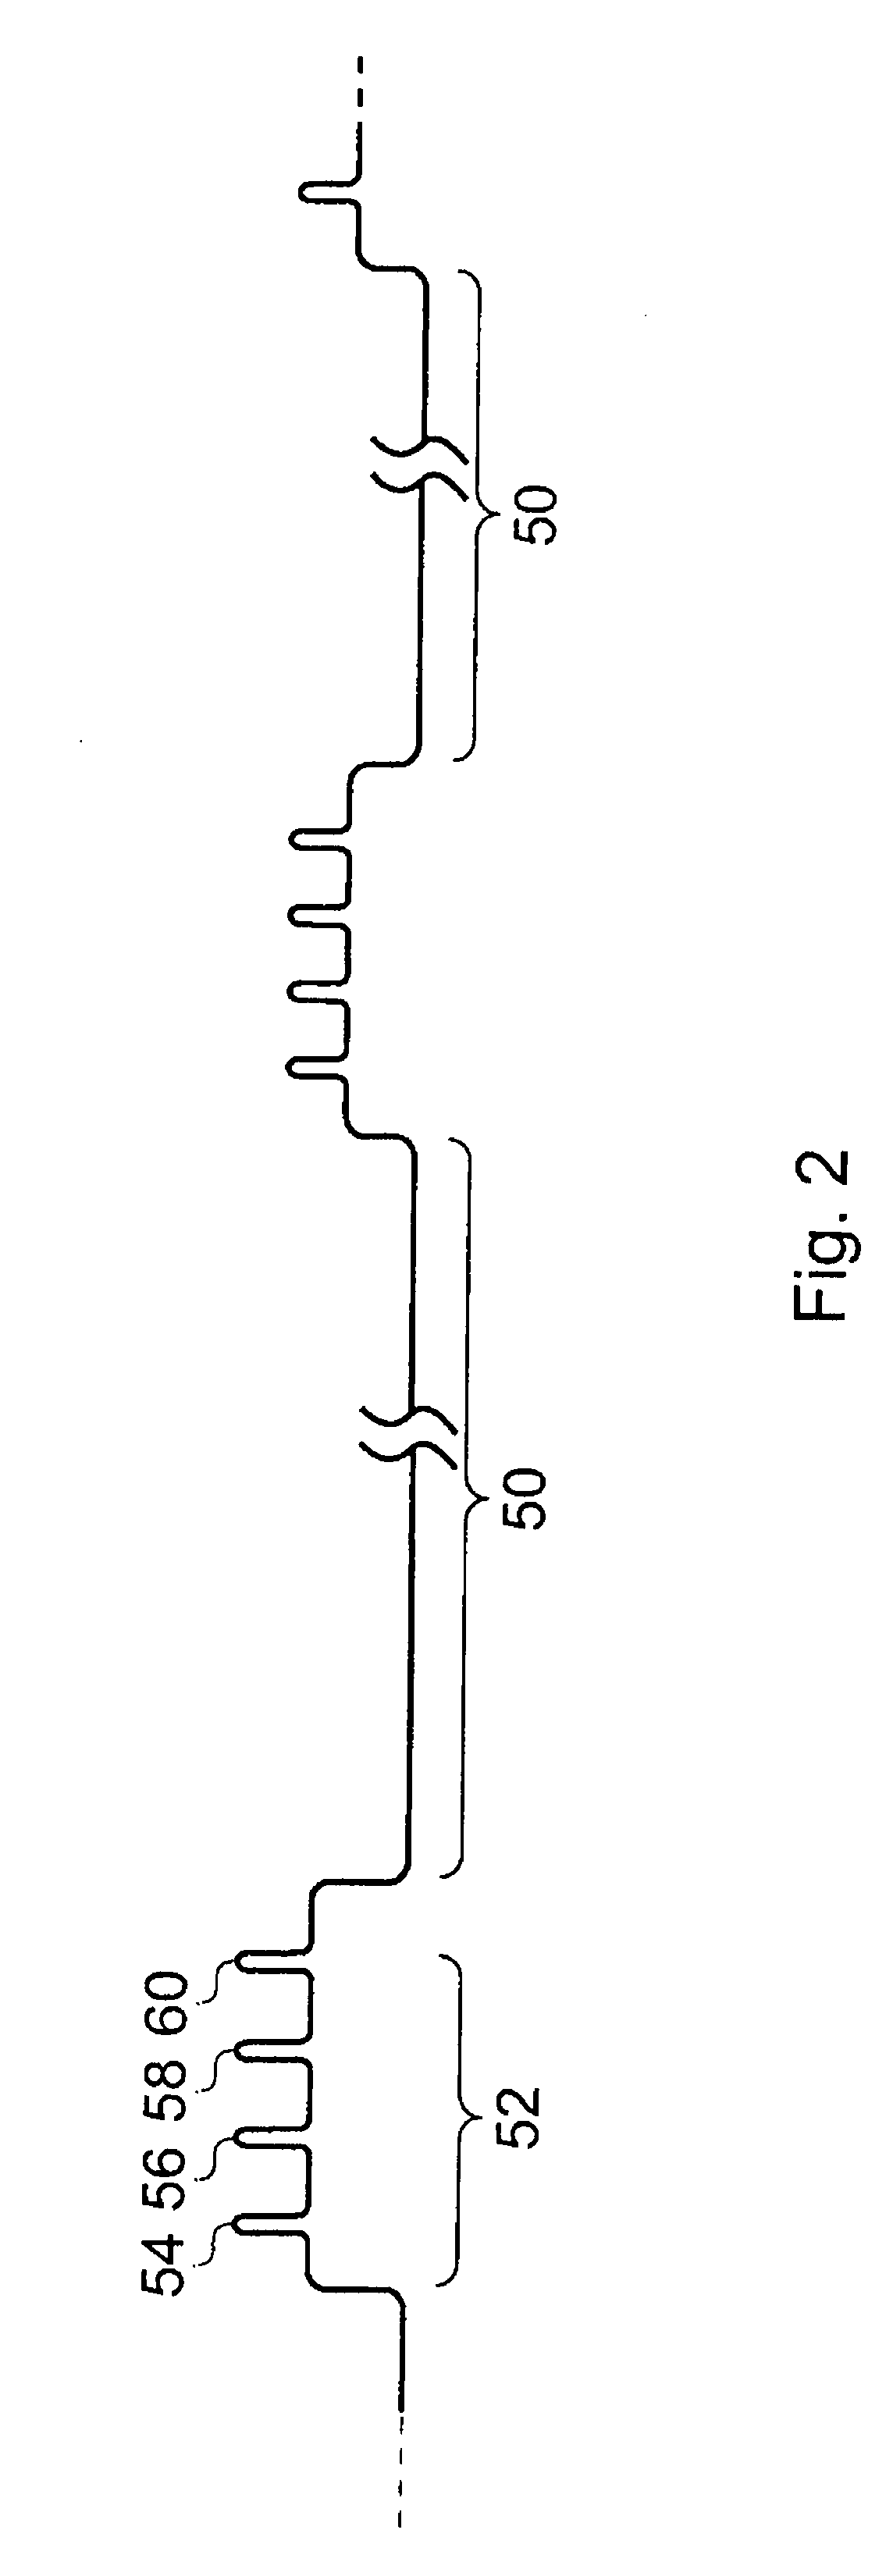 Method of and apparatus for reducing power consumption in a mobile telephony system